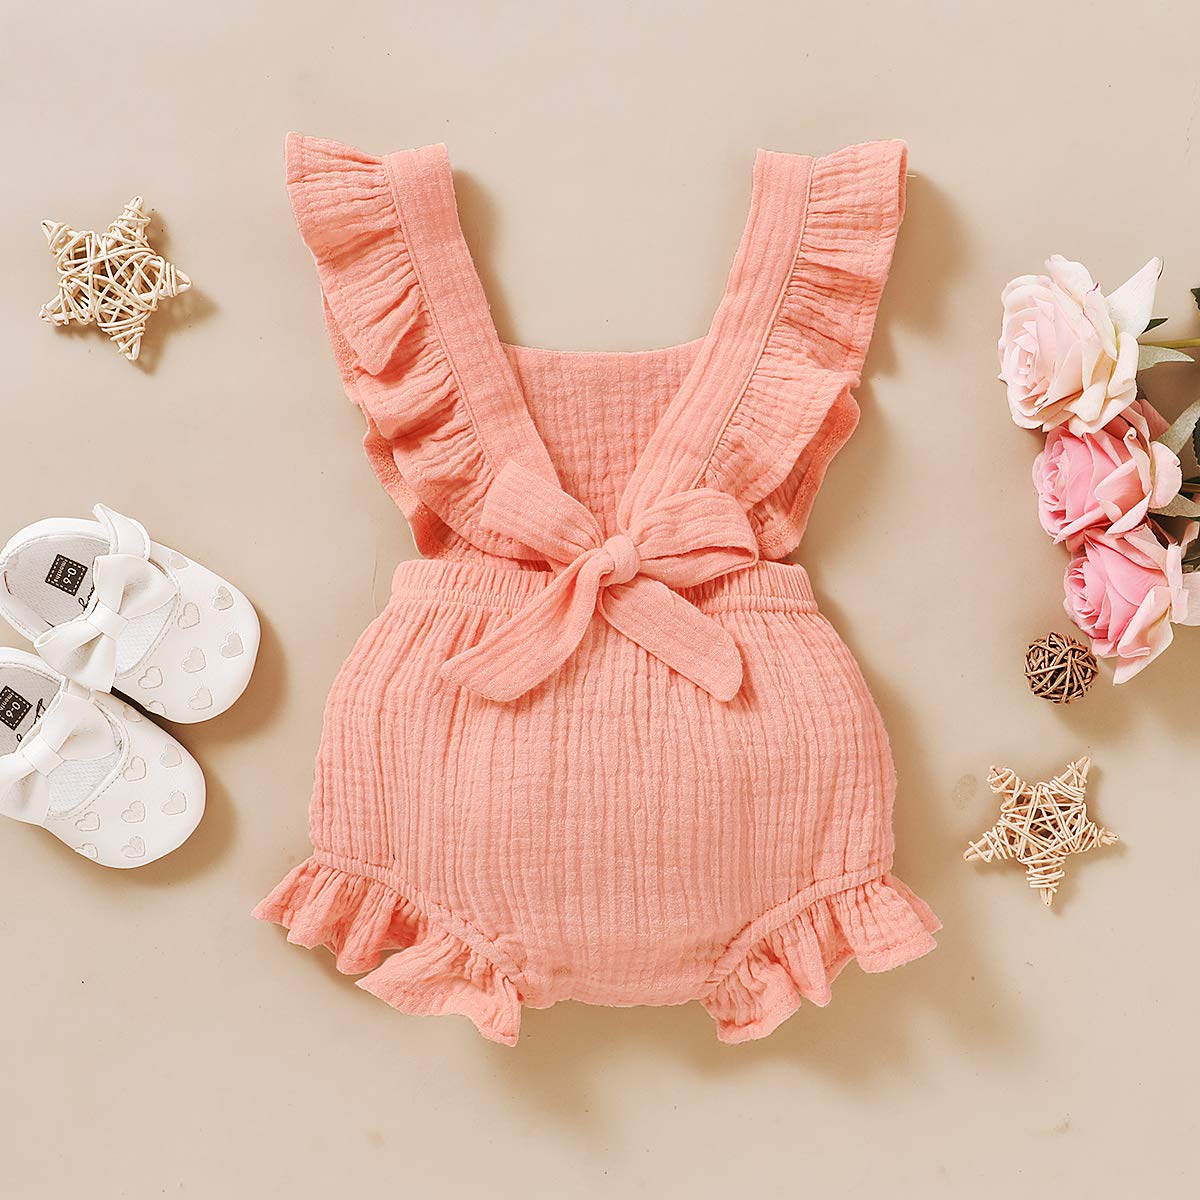 YOUNGER TREE Toddler Baby Girl Ruffled Sleeveless Romper Casual Summer Jumpsuit Cotton Linen Clothes 3-6 Months